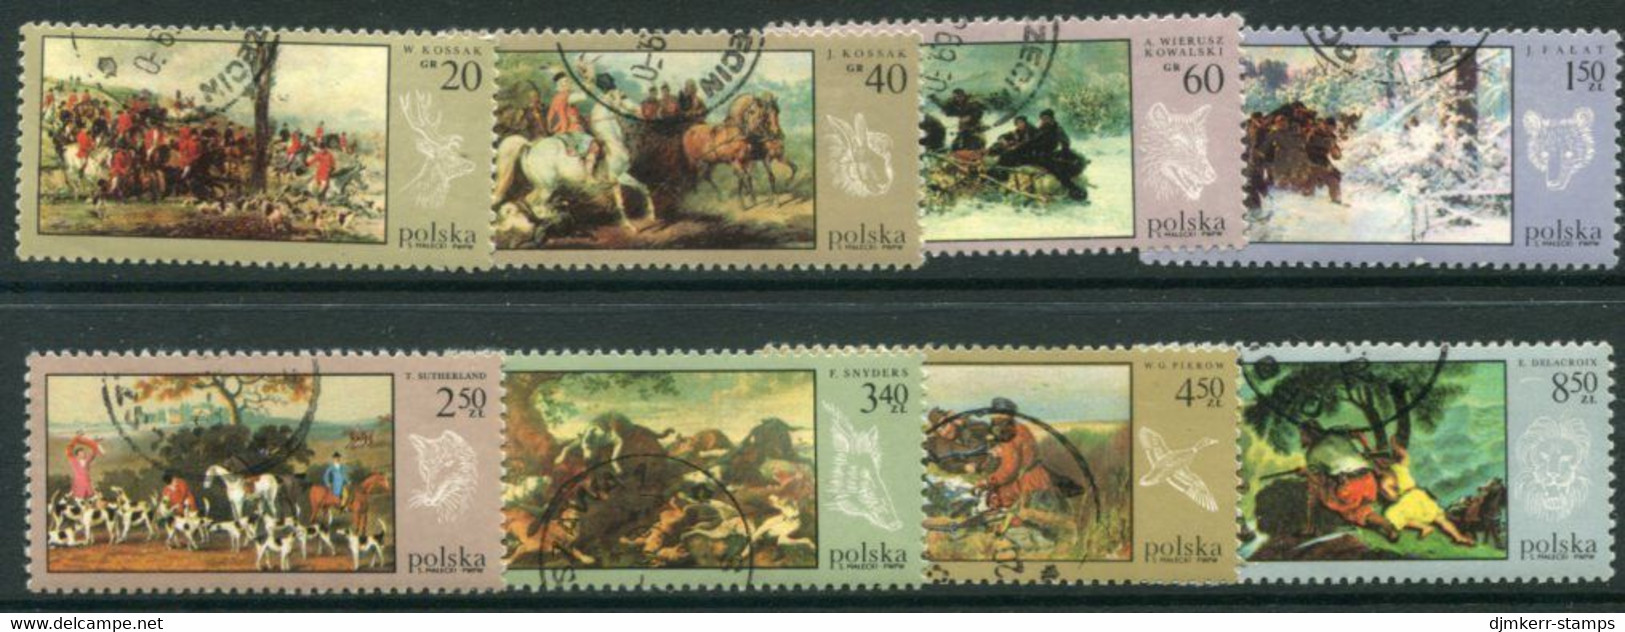 POLAND 1968 Paintings: Hunting Scenes Used.  Michel 1890-97 - Oblitérés